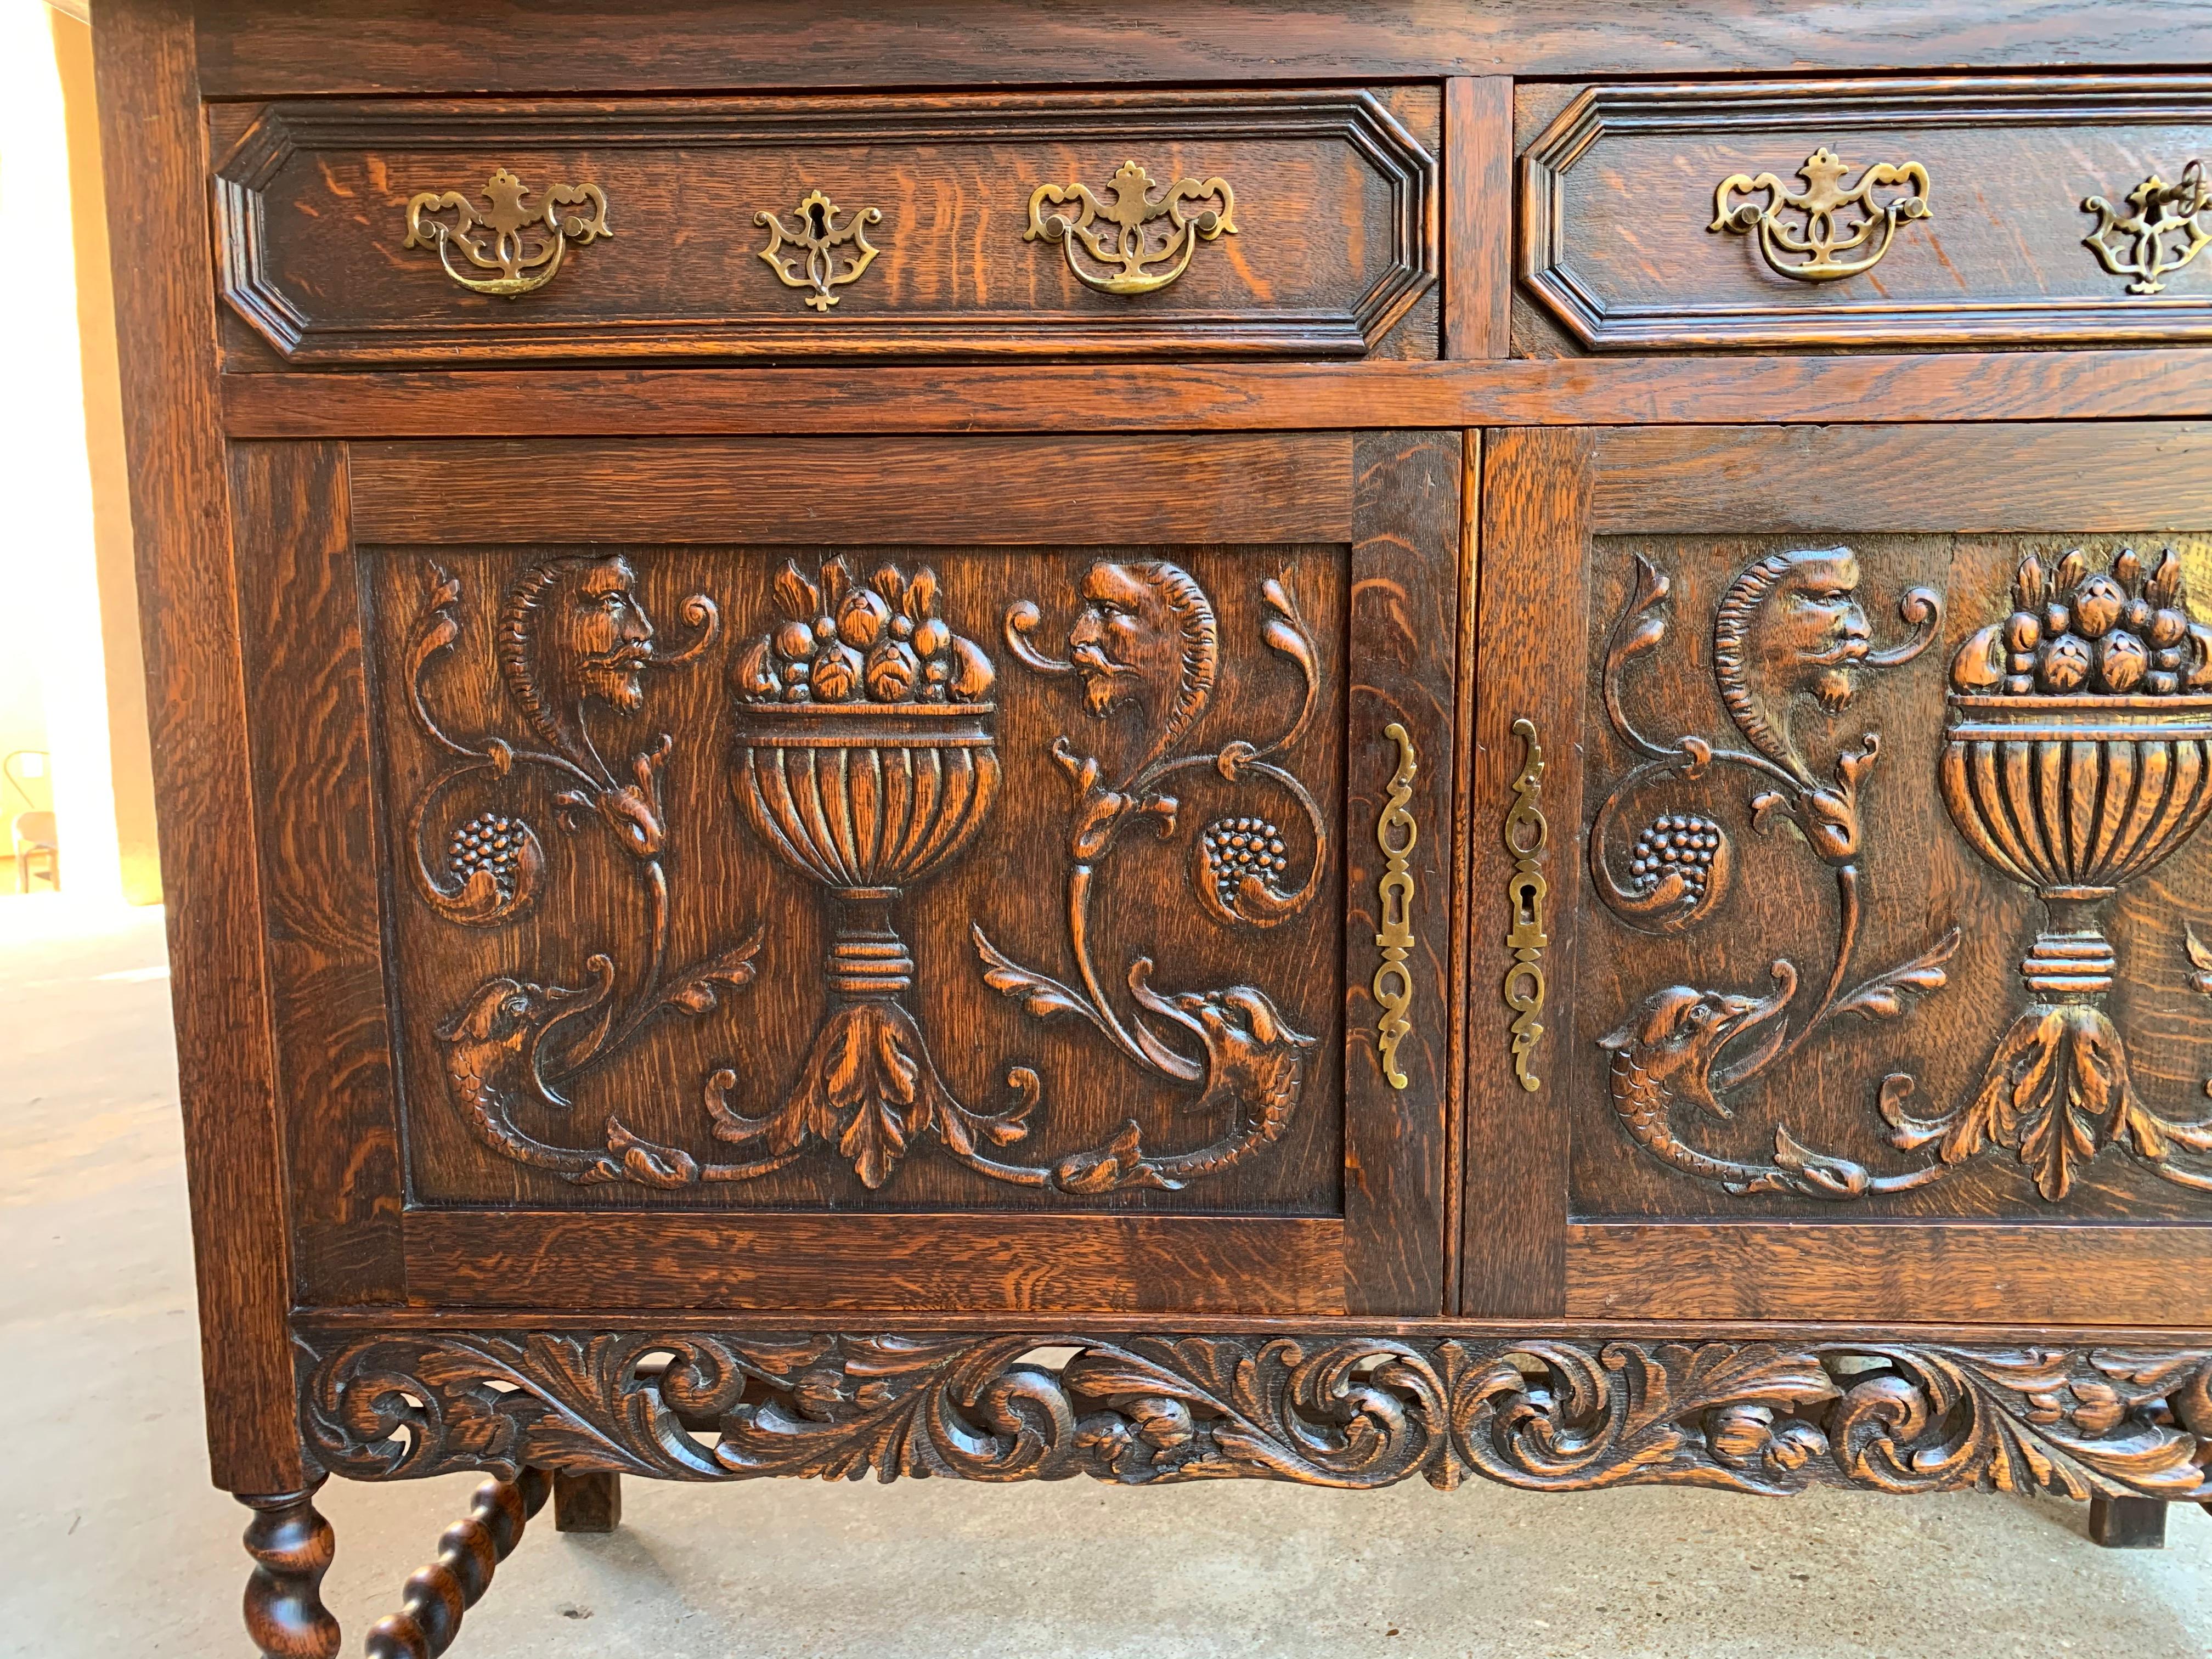 Early 20th Century Antique English Carved Oak Barley Twist Sideboard Buffet Cabinet Jacobean Style